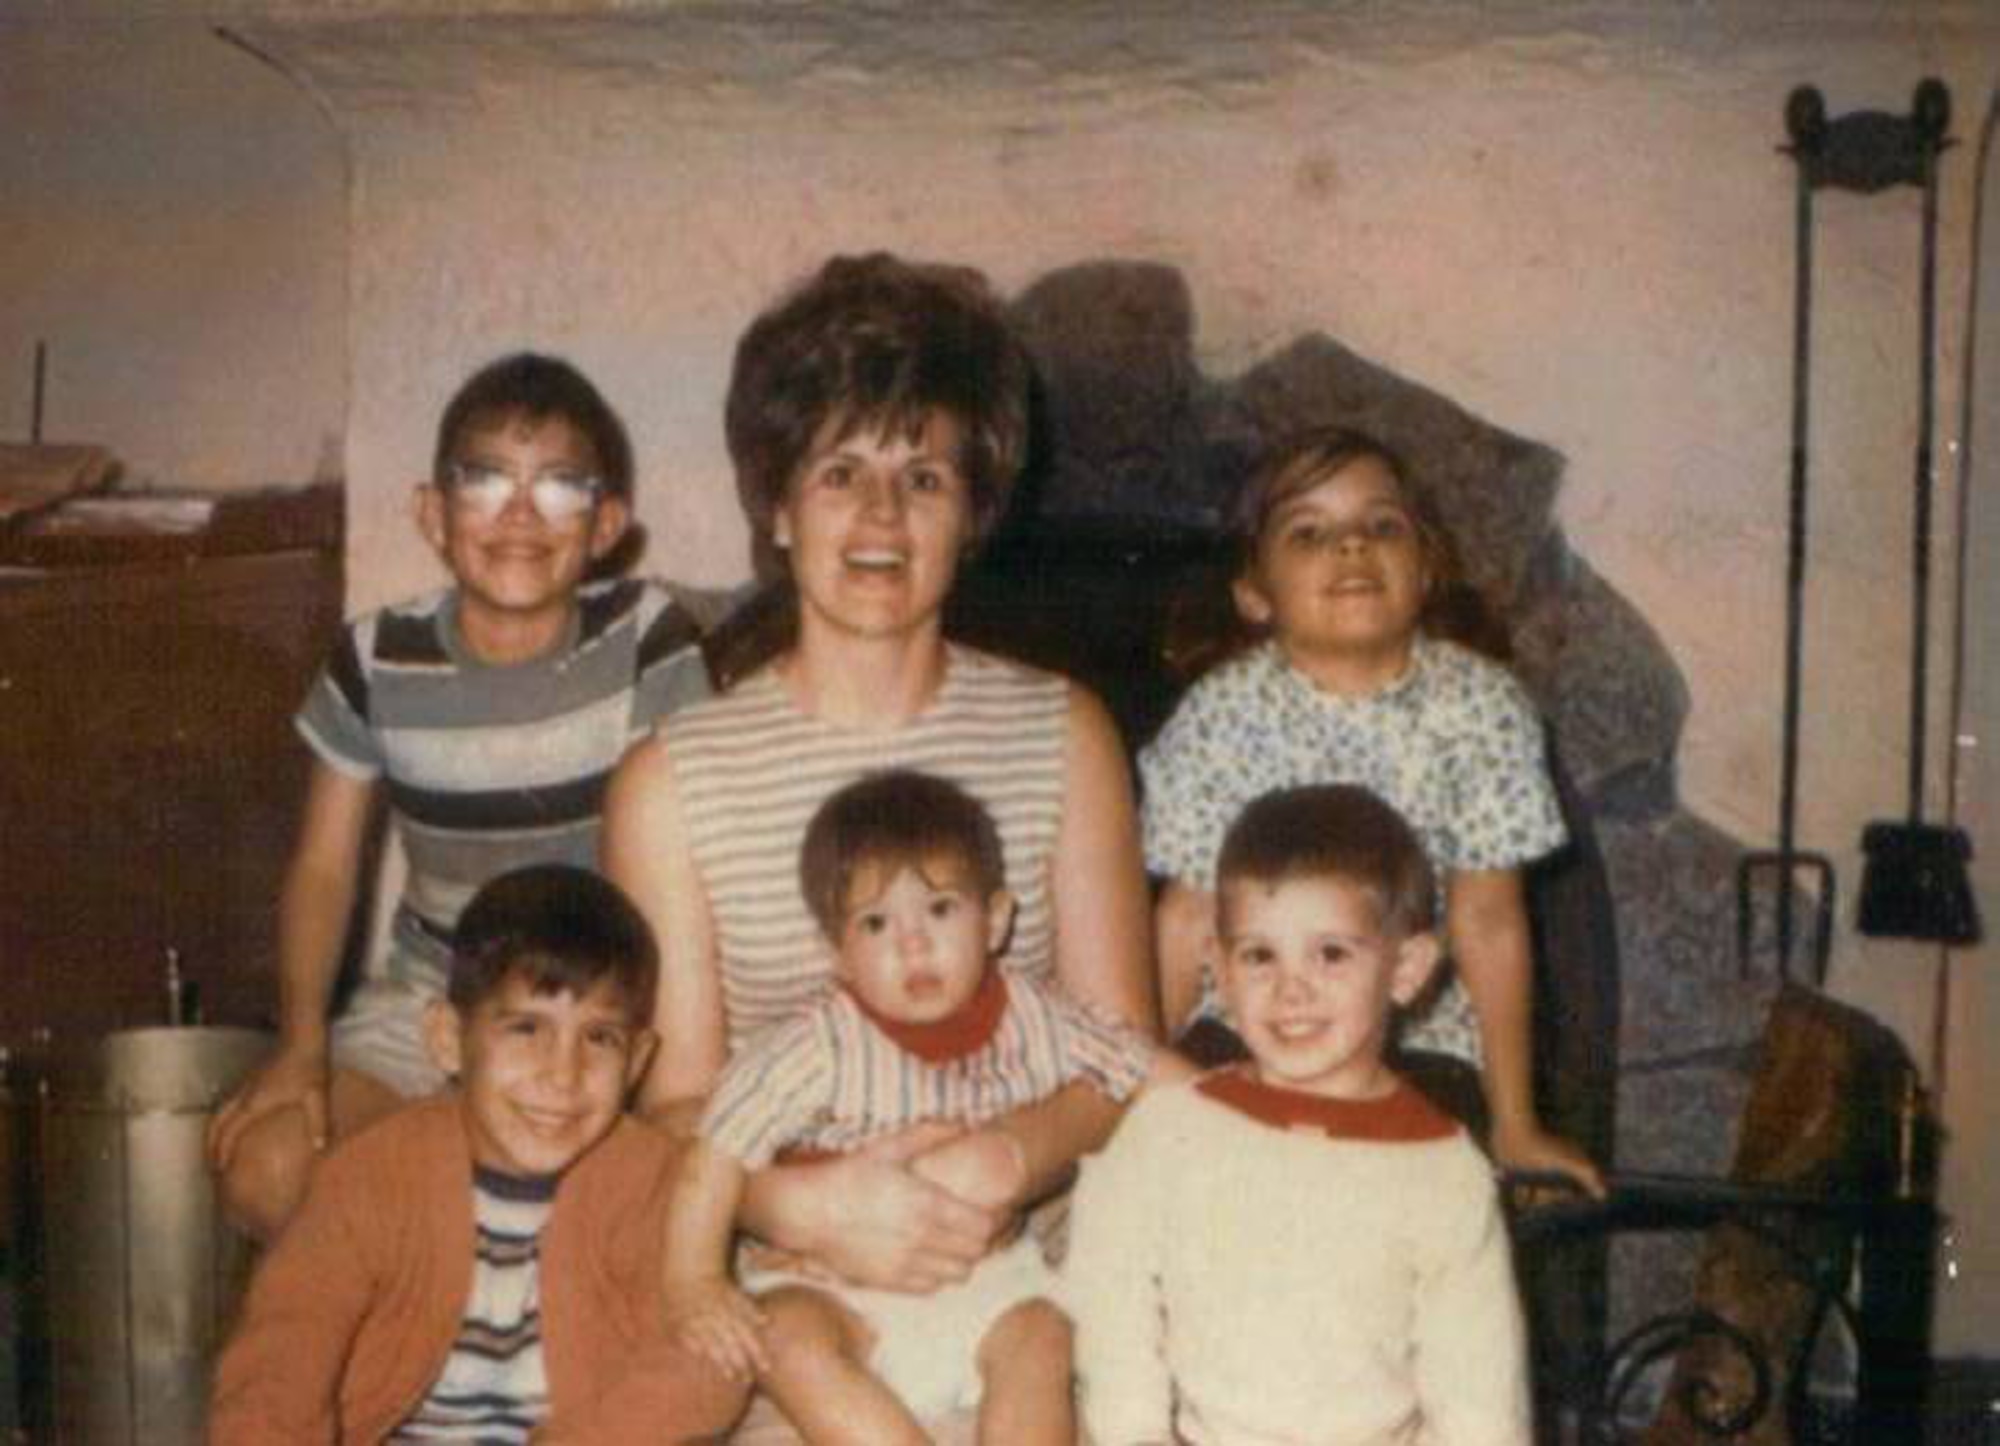 Kathleen and the five children in Santa Barbara, Calif., in 1967. Back row: Bill II, Kathleen and Theresa; front row: Tony, Jim and Richard. (Courtesy photo)